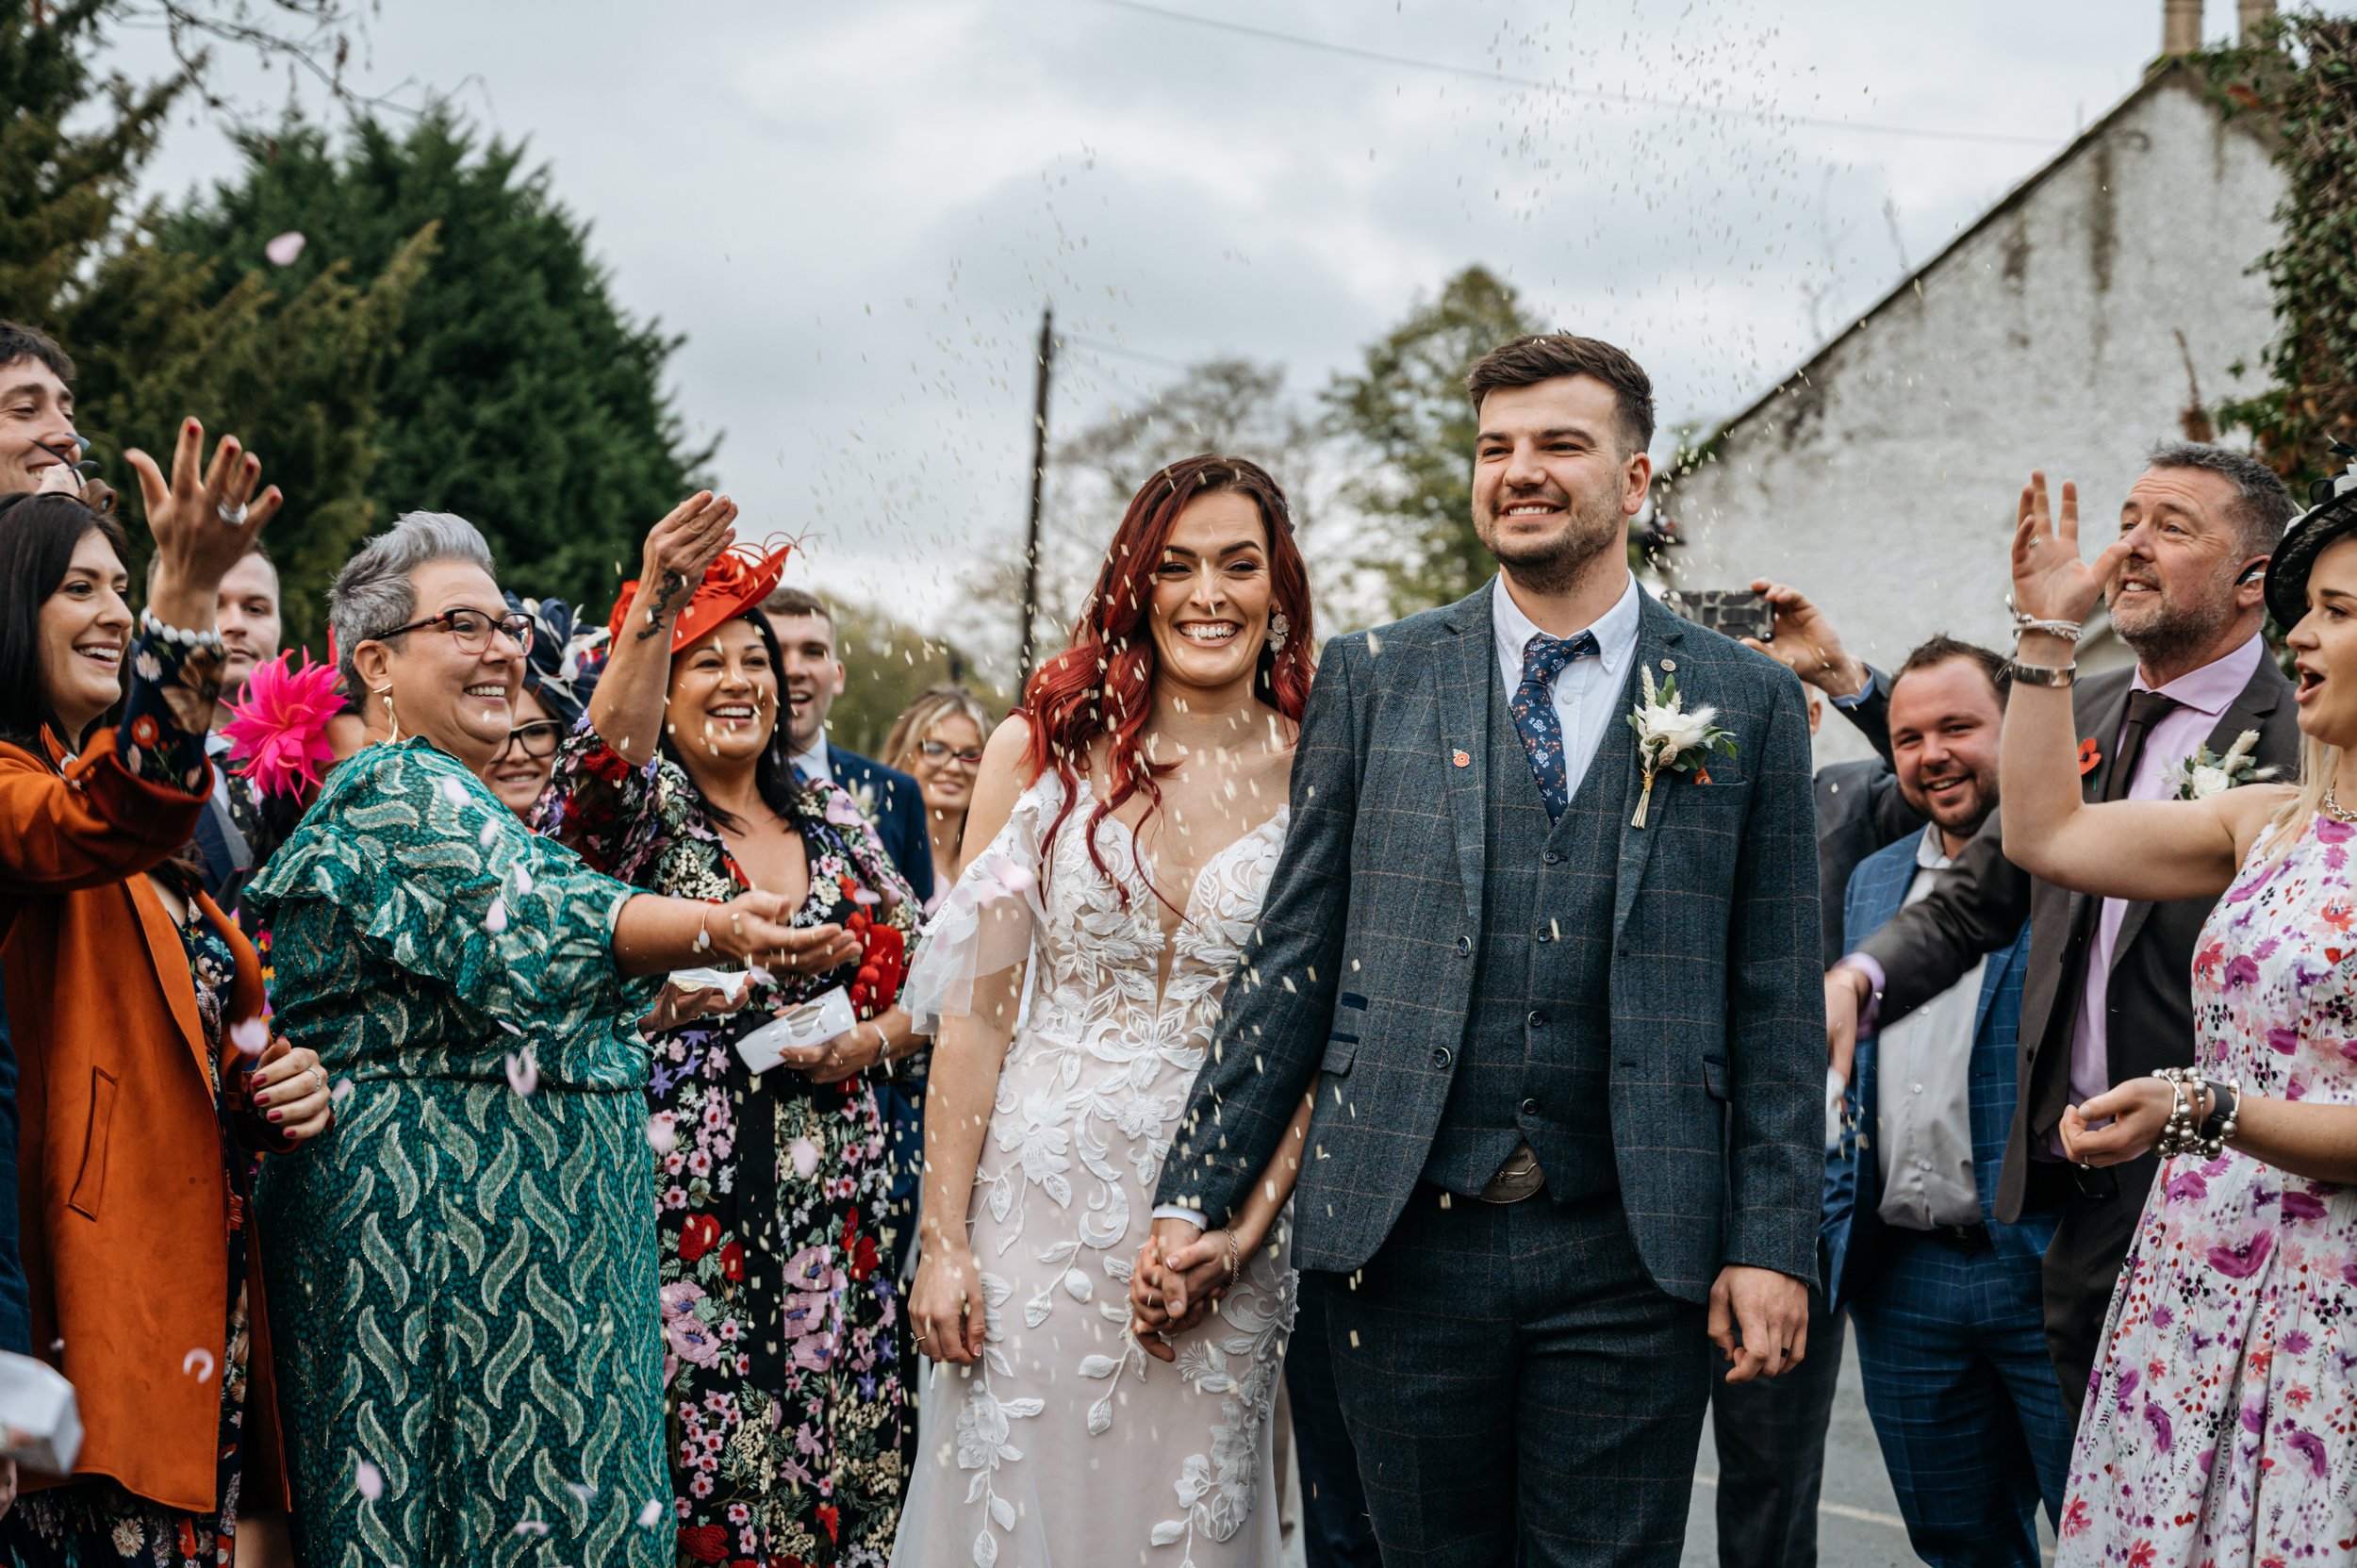  The bride and groom are walking outside towards the wedding photographer holding hands and smiling. The wedding guests on either side are throwing confetti over them. The groom is wearing a navy and brown check 3-piece suit with a navy floral tie an